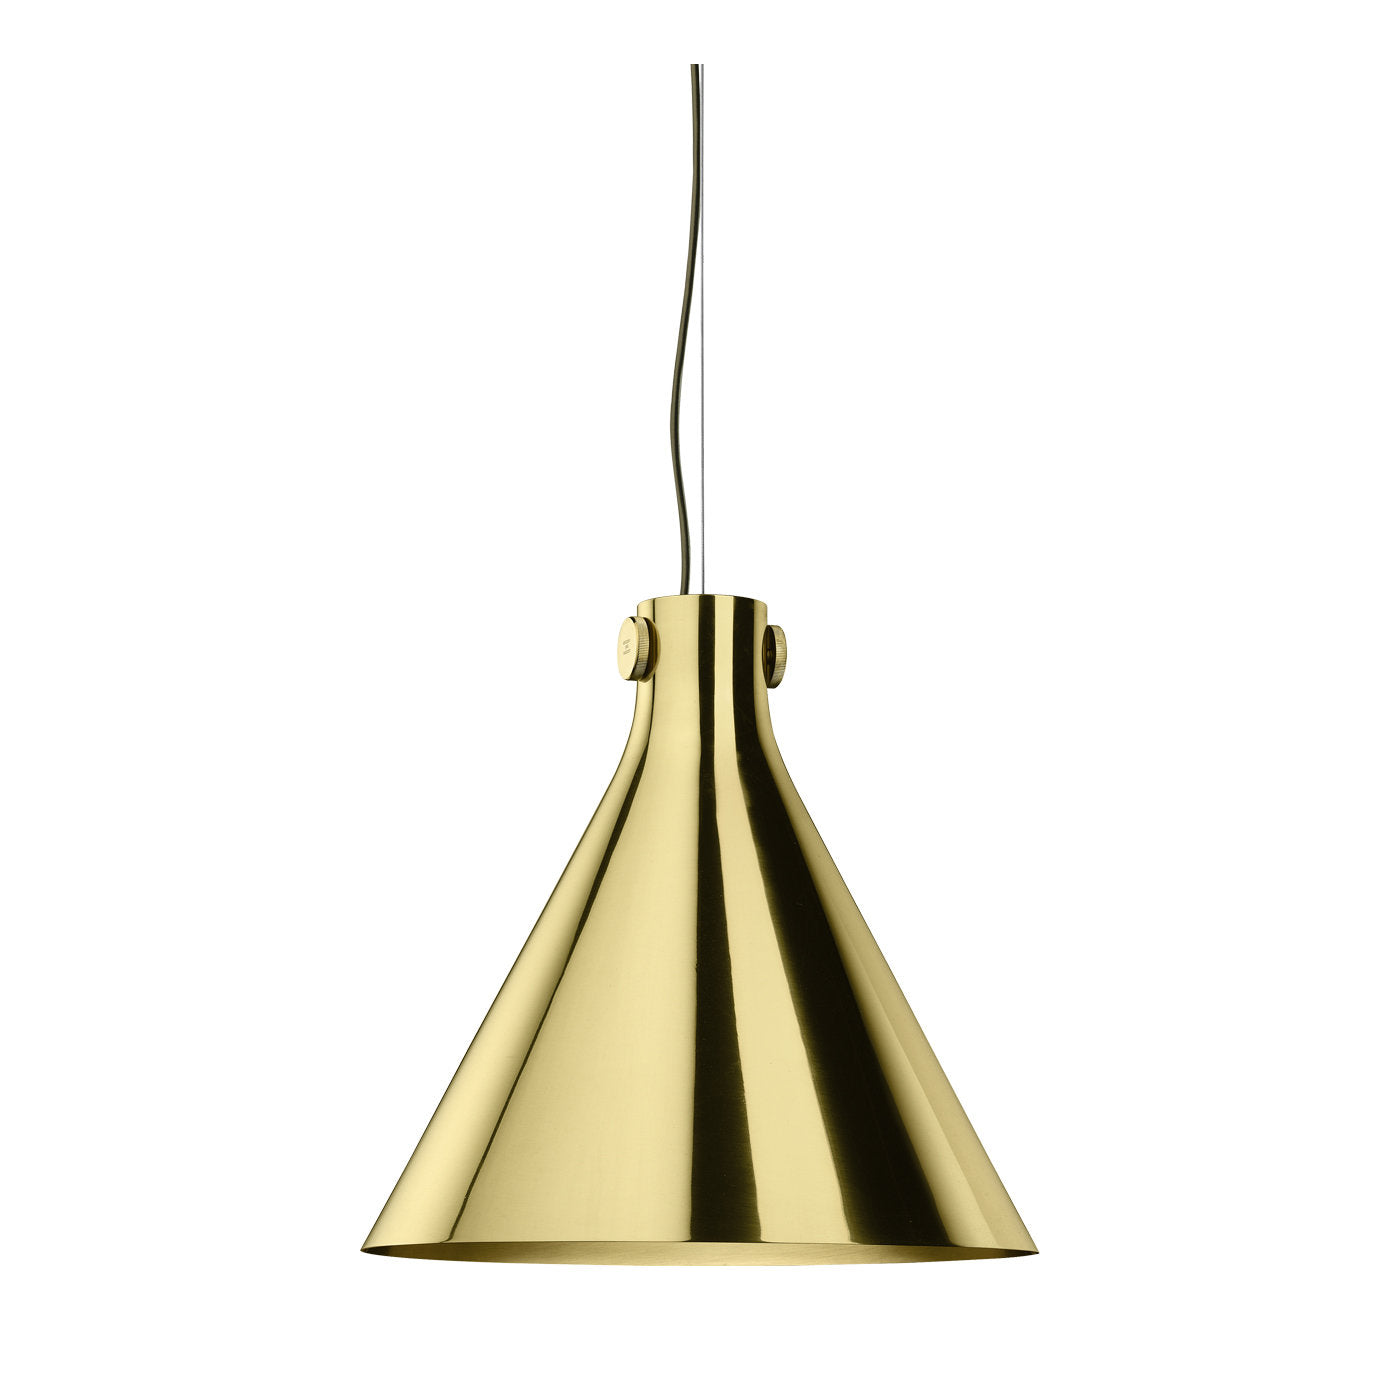 Cone Suspension Lamp in Polished Brass By Richard Hutten - Main view